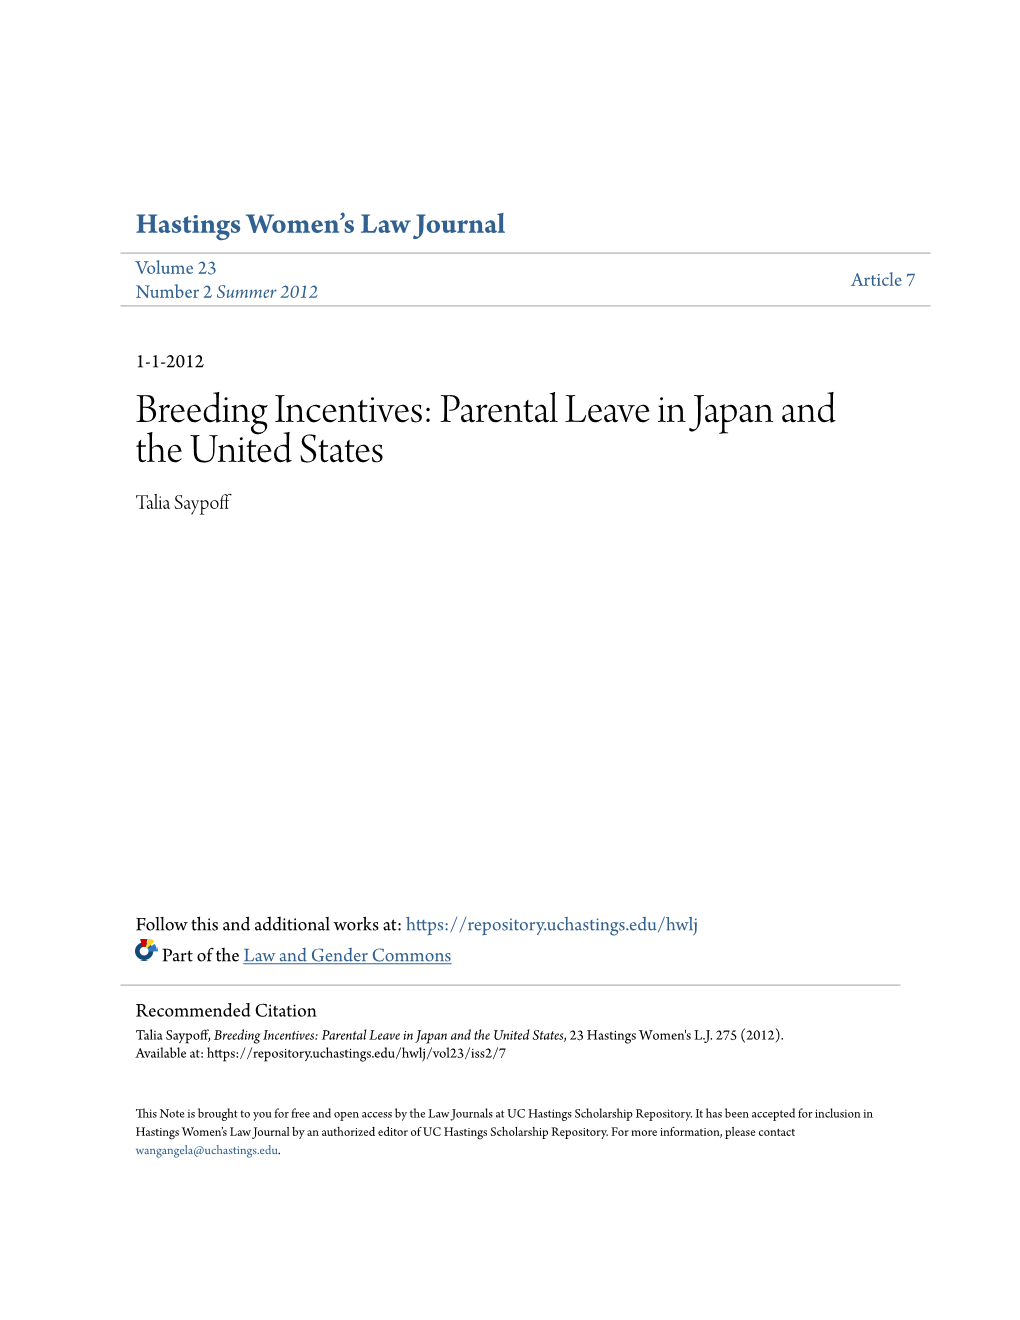 Parental Leave in Japan and the United States Talia Saypoff